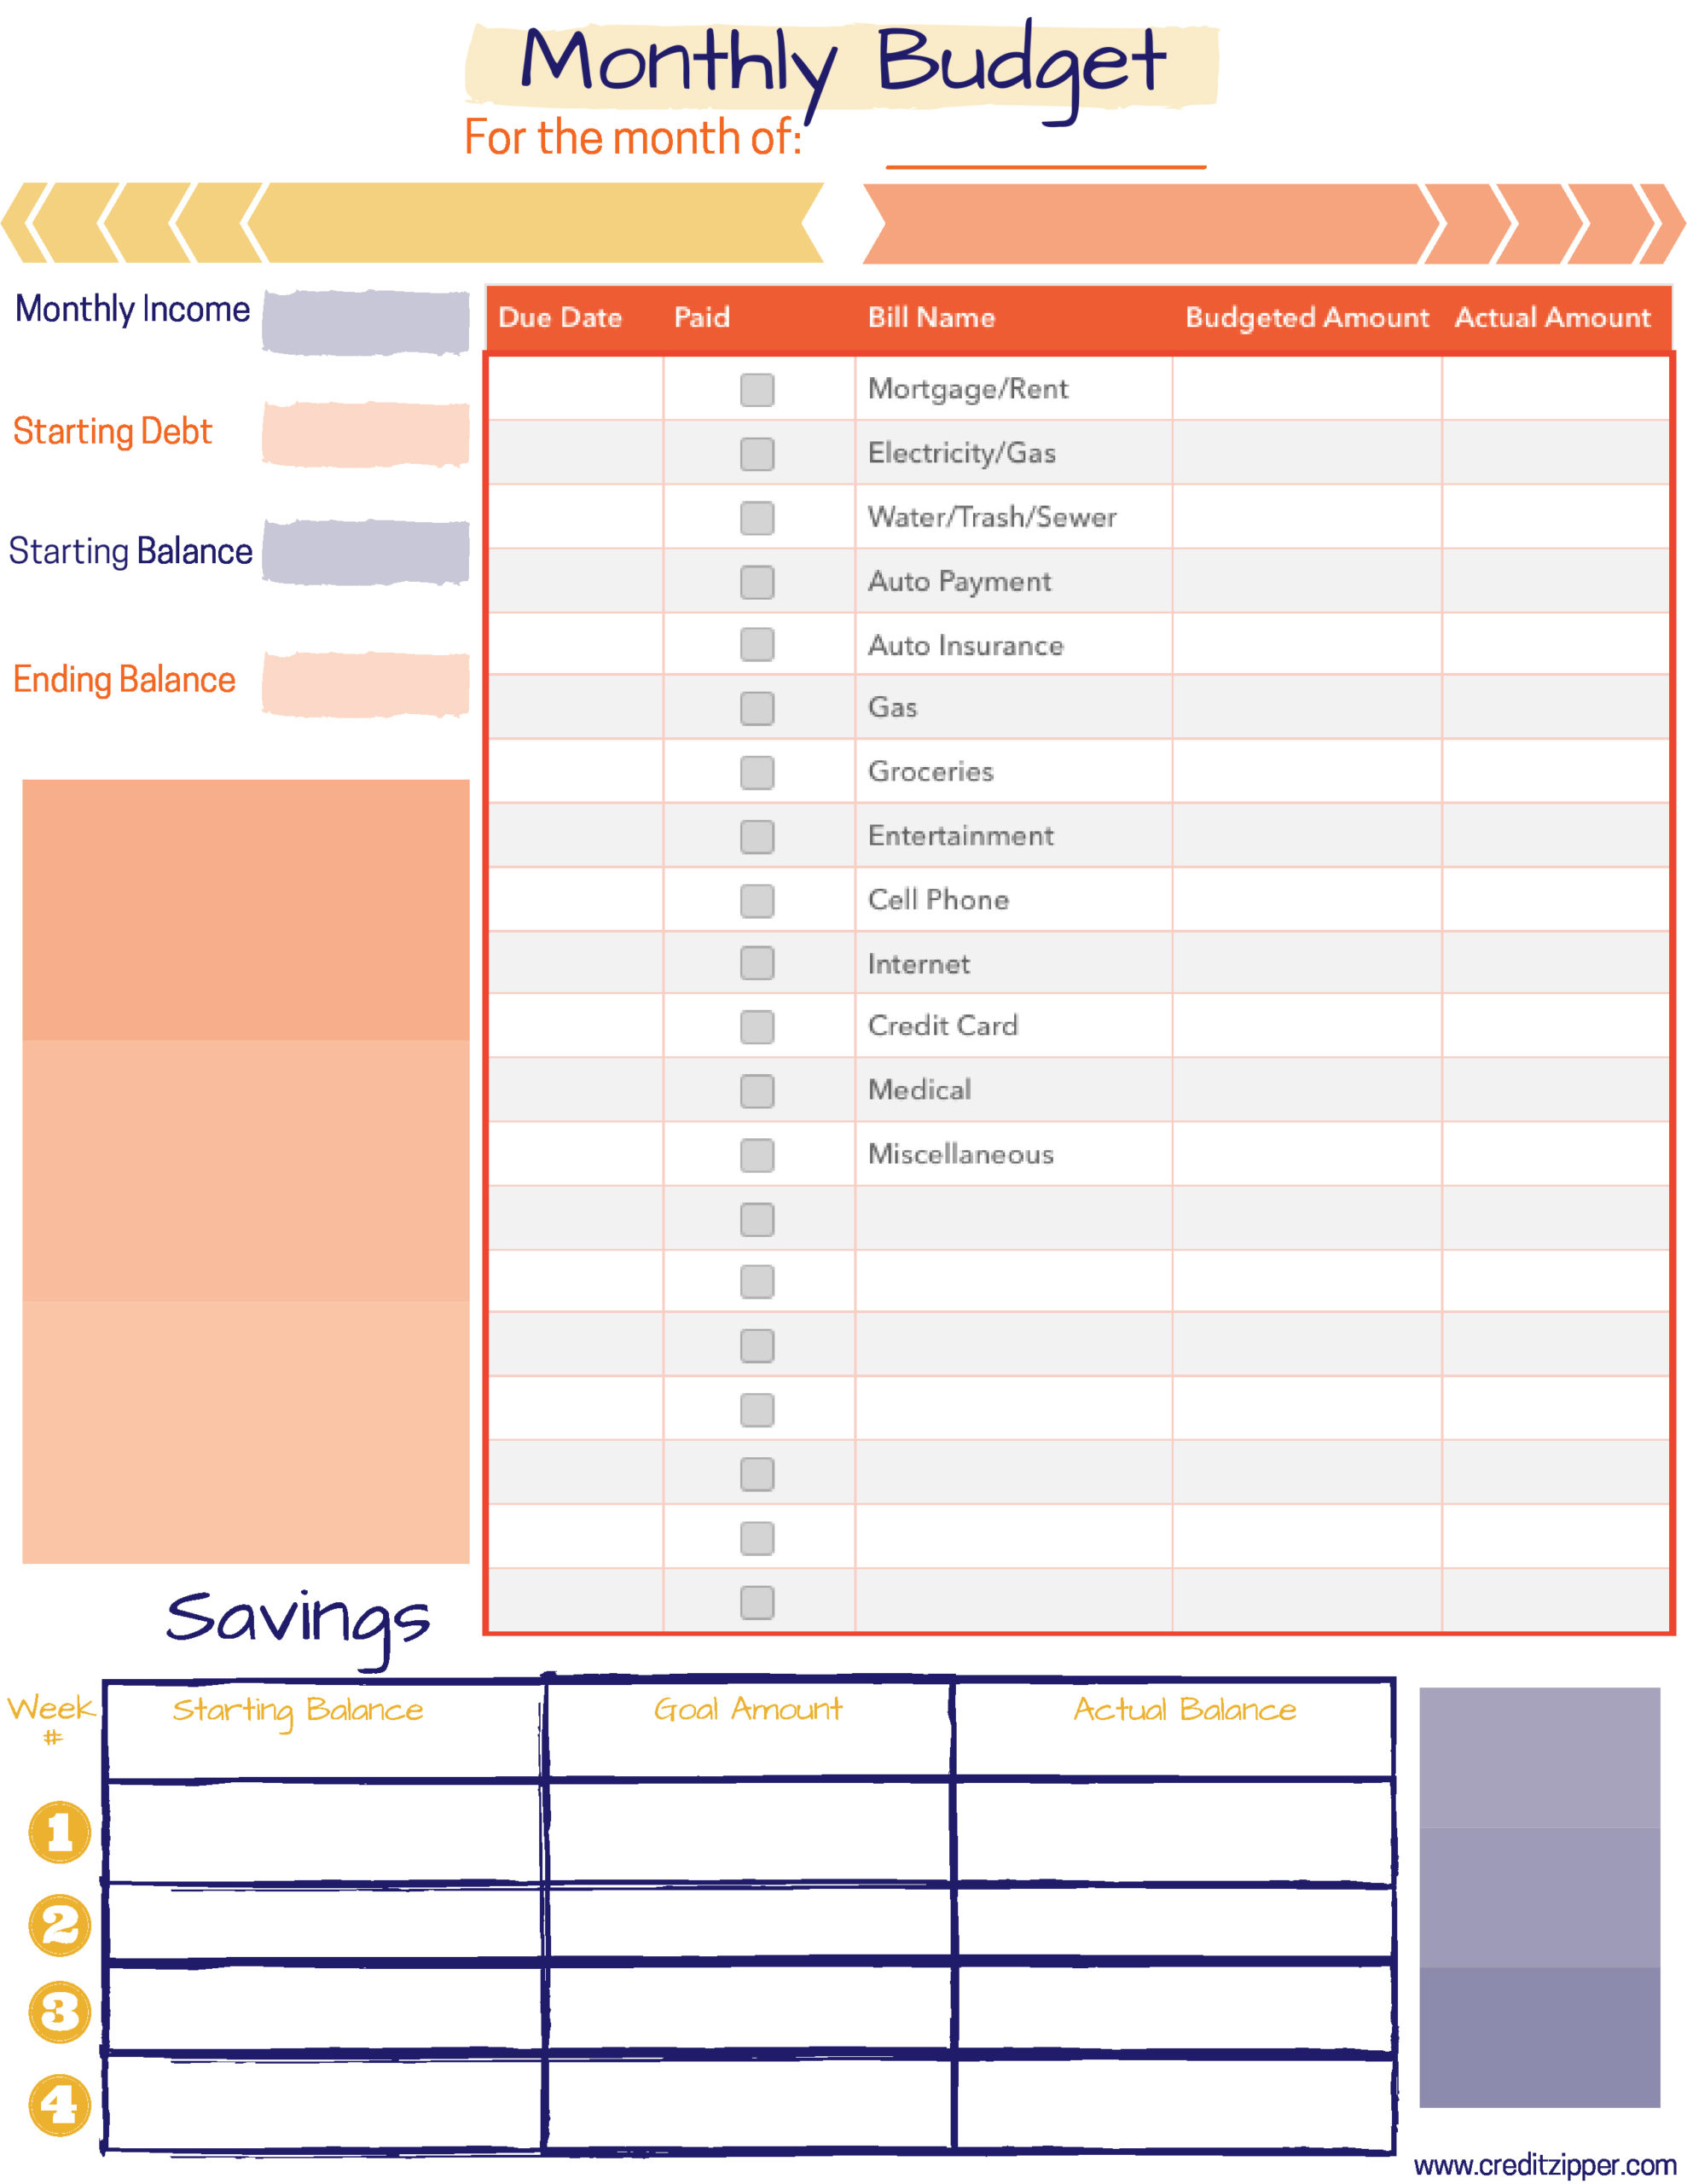 Free Monthly Budget Planner Printable | Credit Zipper throughout Simple Budget Planner Template Sheets